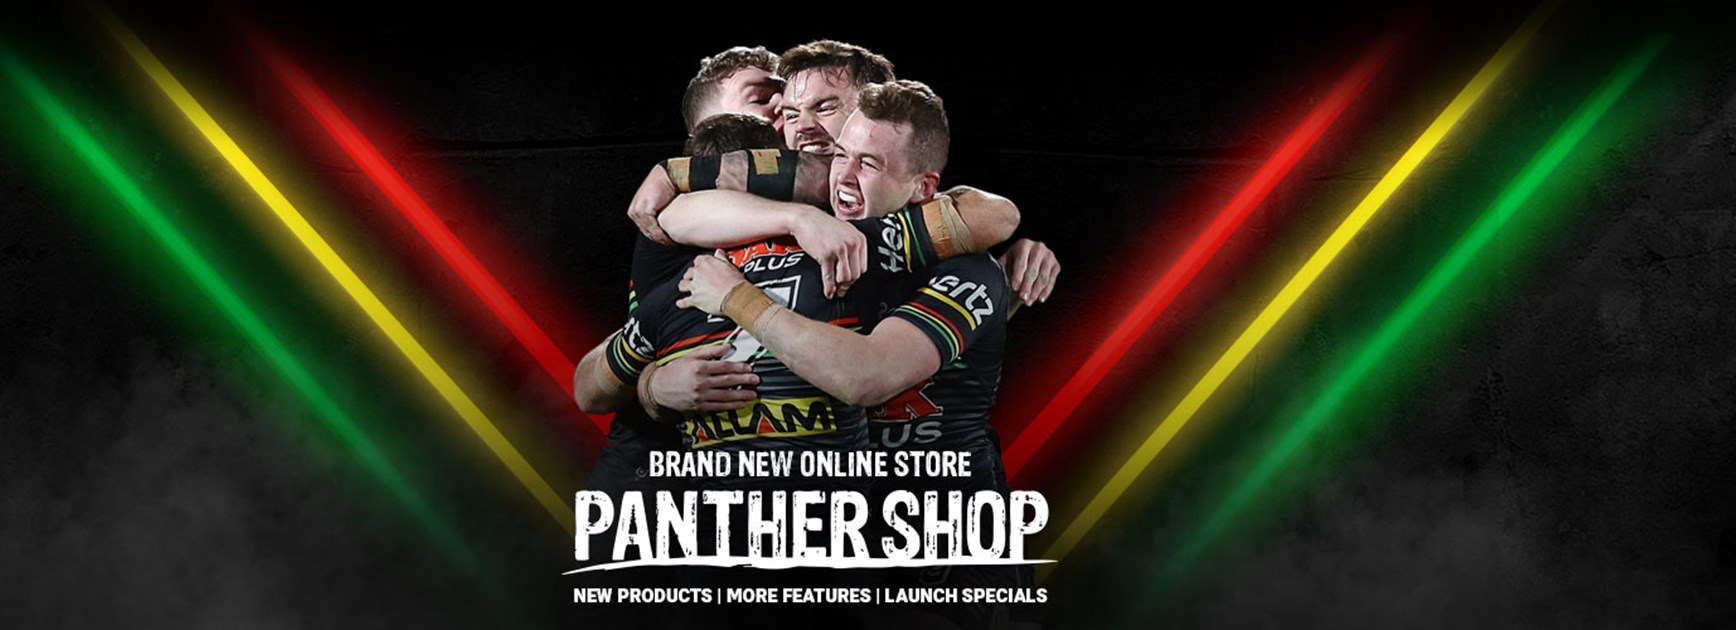 New-look Panther Shop goes live